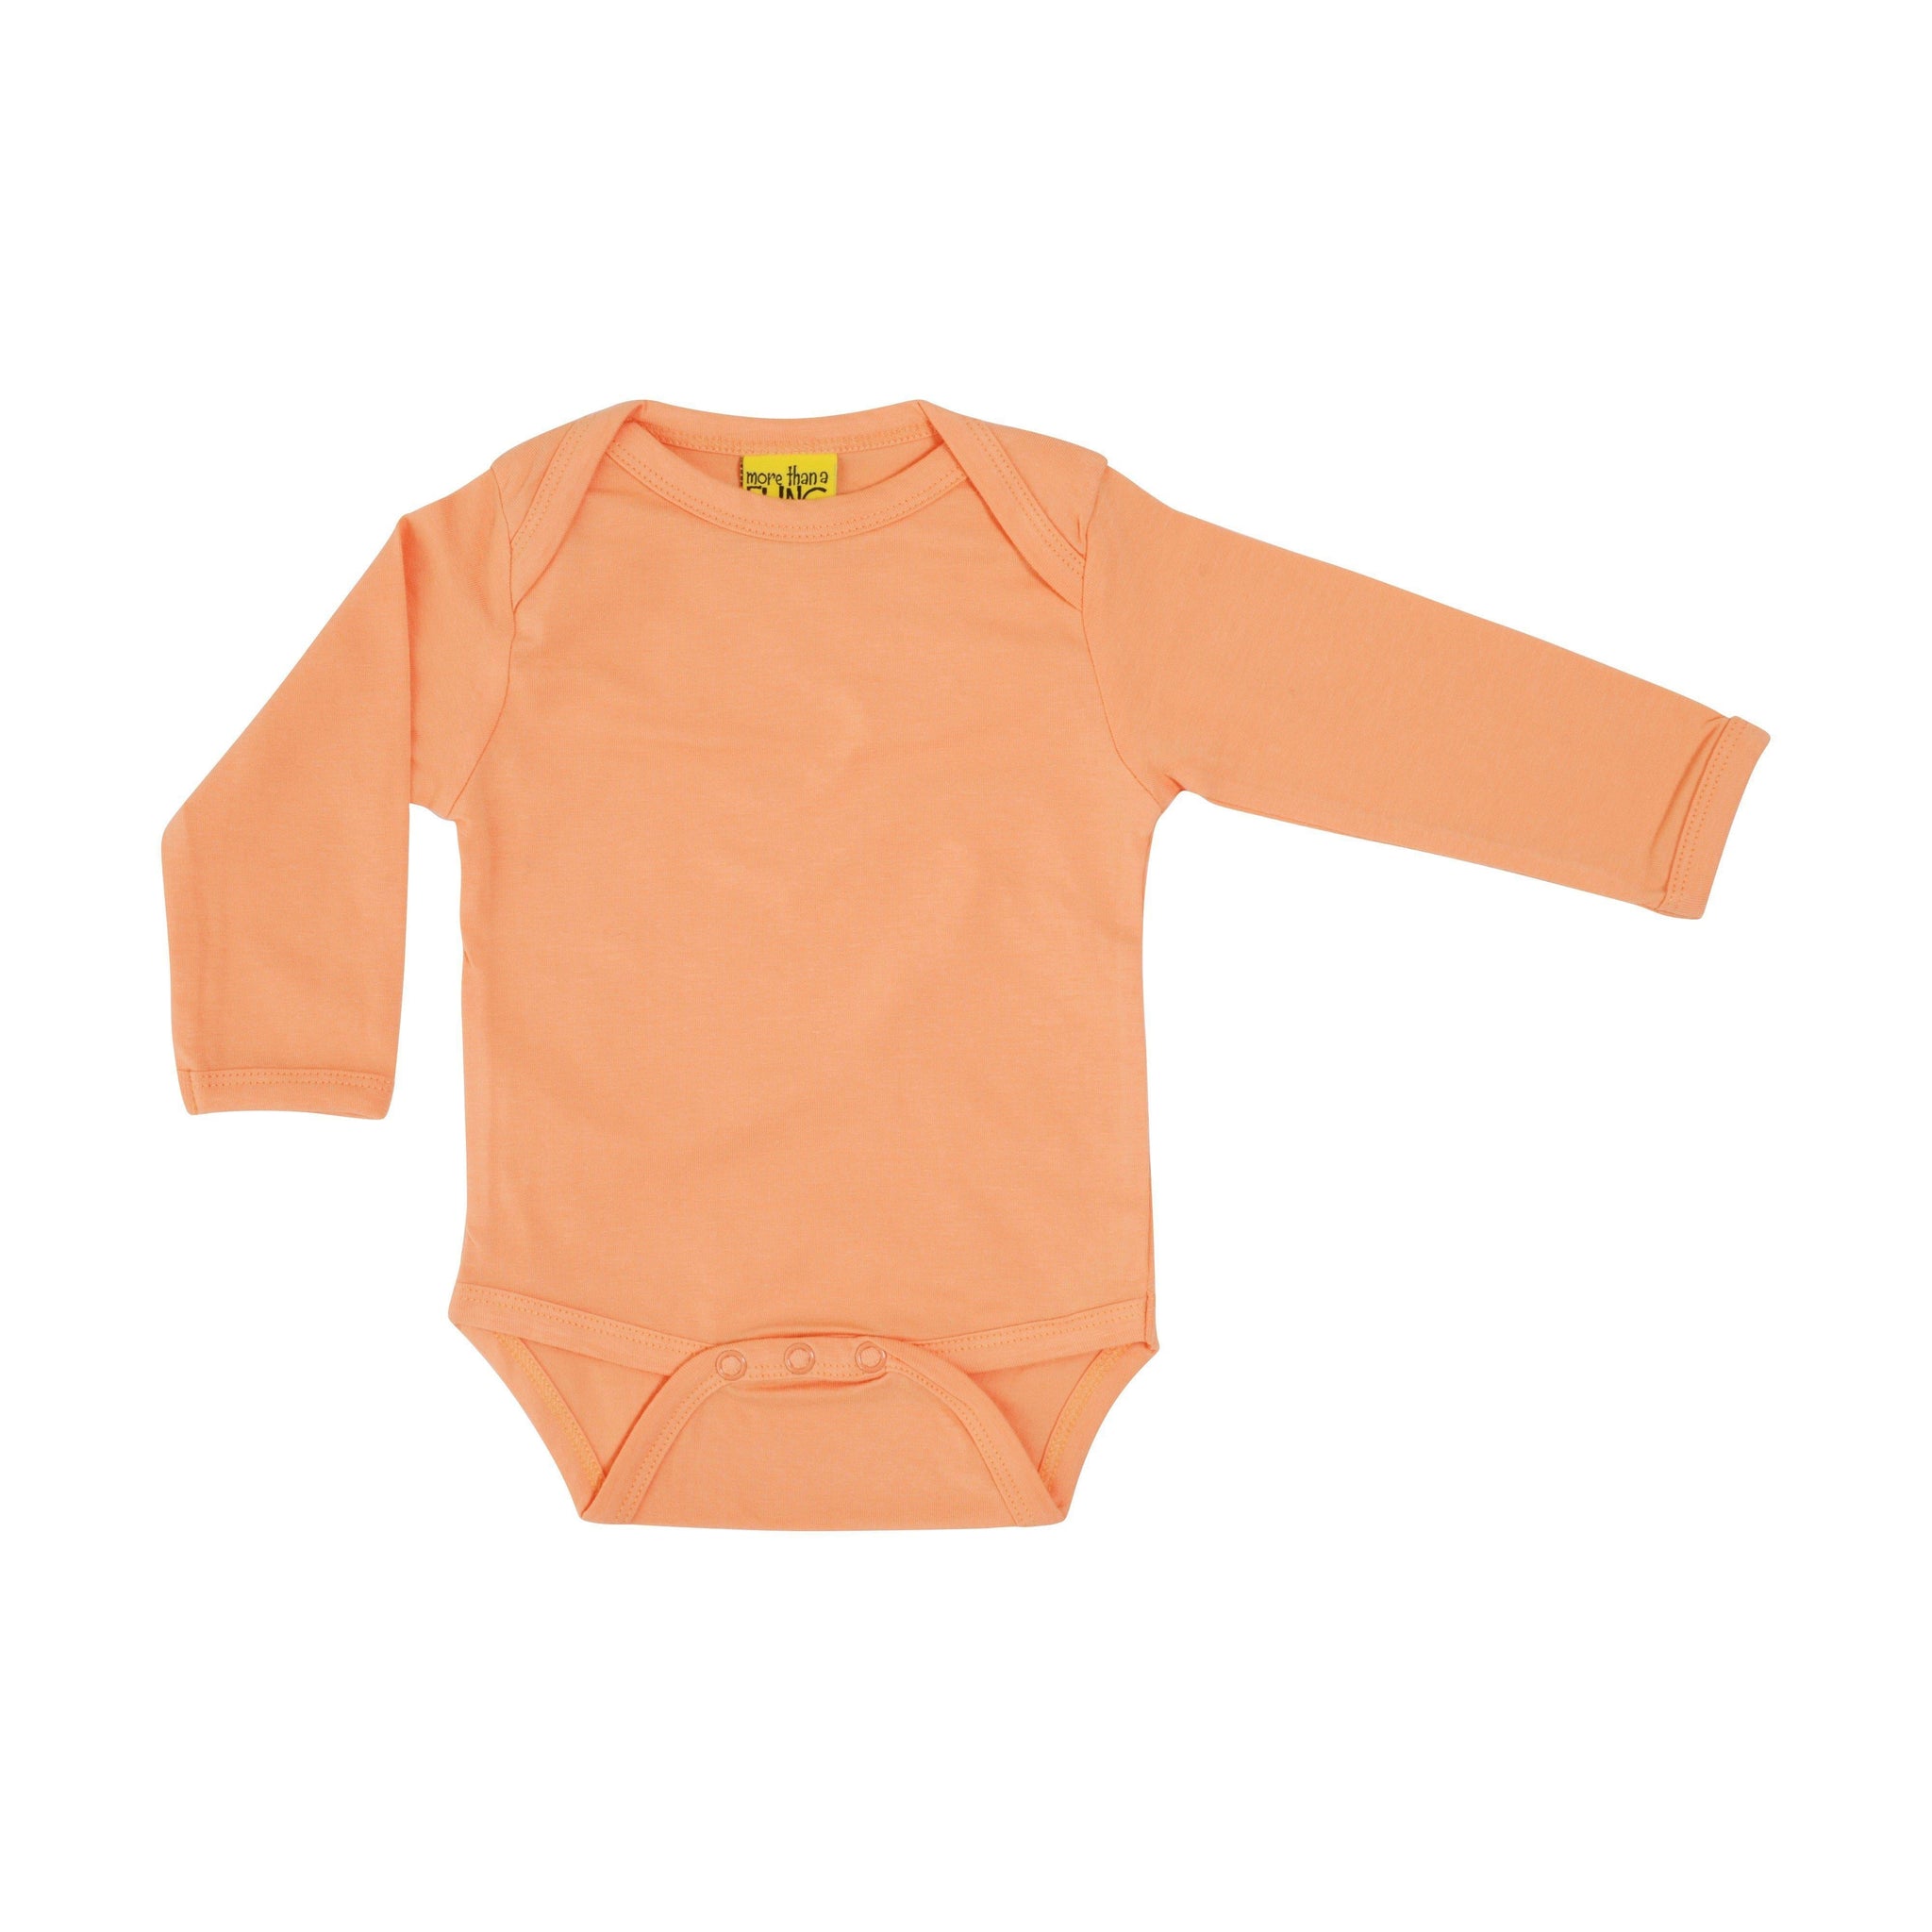 More than a Fling - Canteloupe Long Sleeved Body Top (2-4 Months)